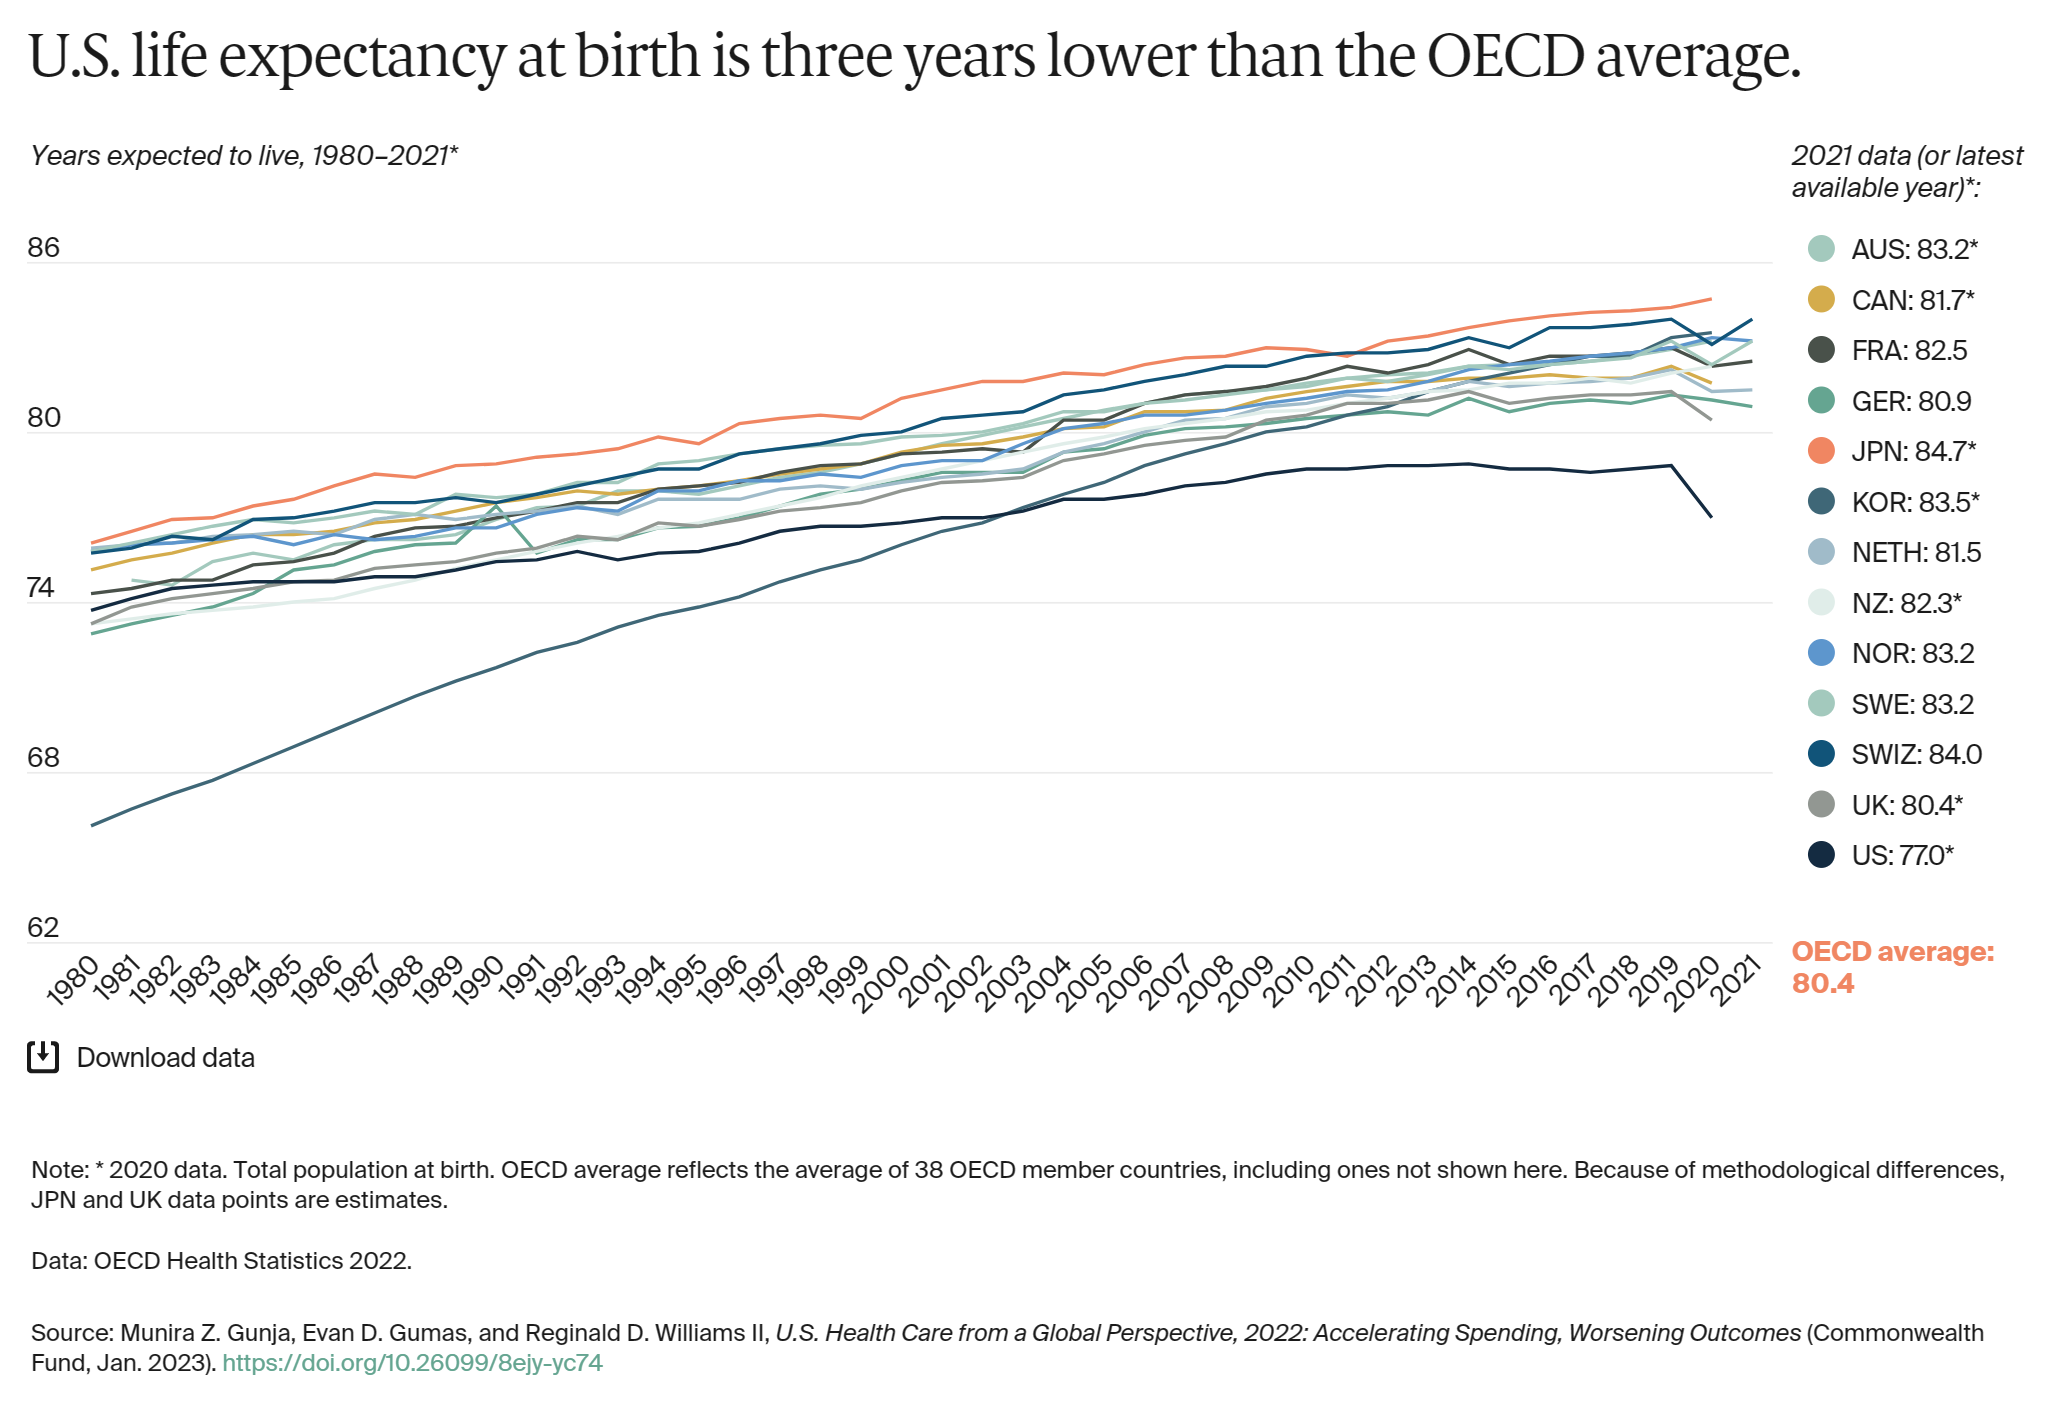 Years expected to live in OECD nations, 1980–2021. U.S. life expectancy at birth is three years lower than the OECD average. Graphic: The Commonwealth Fund